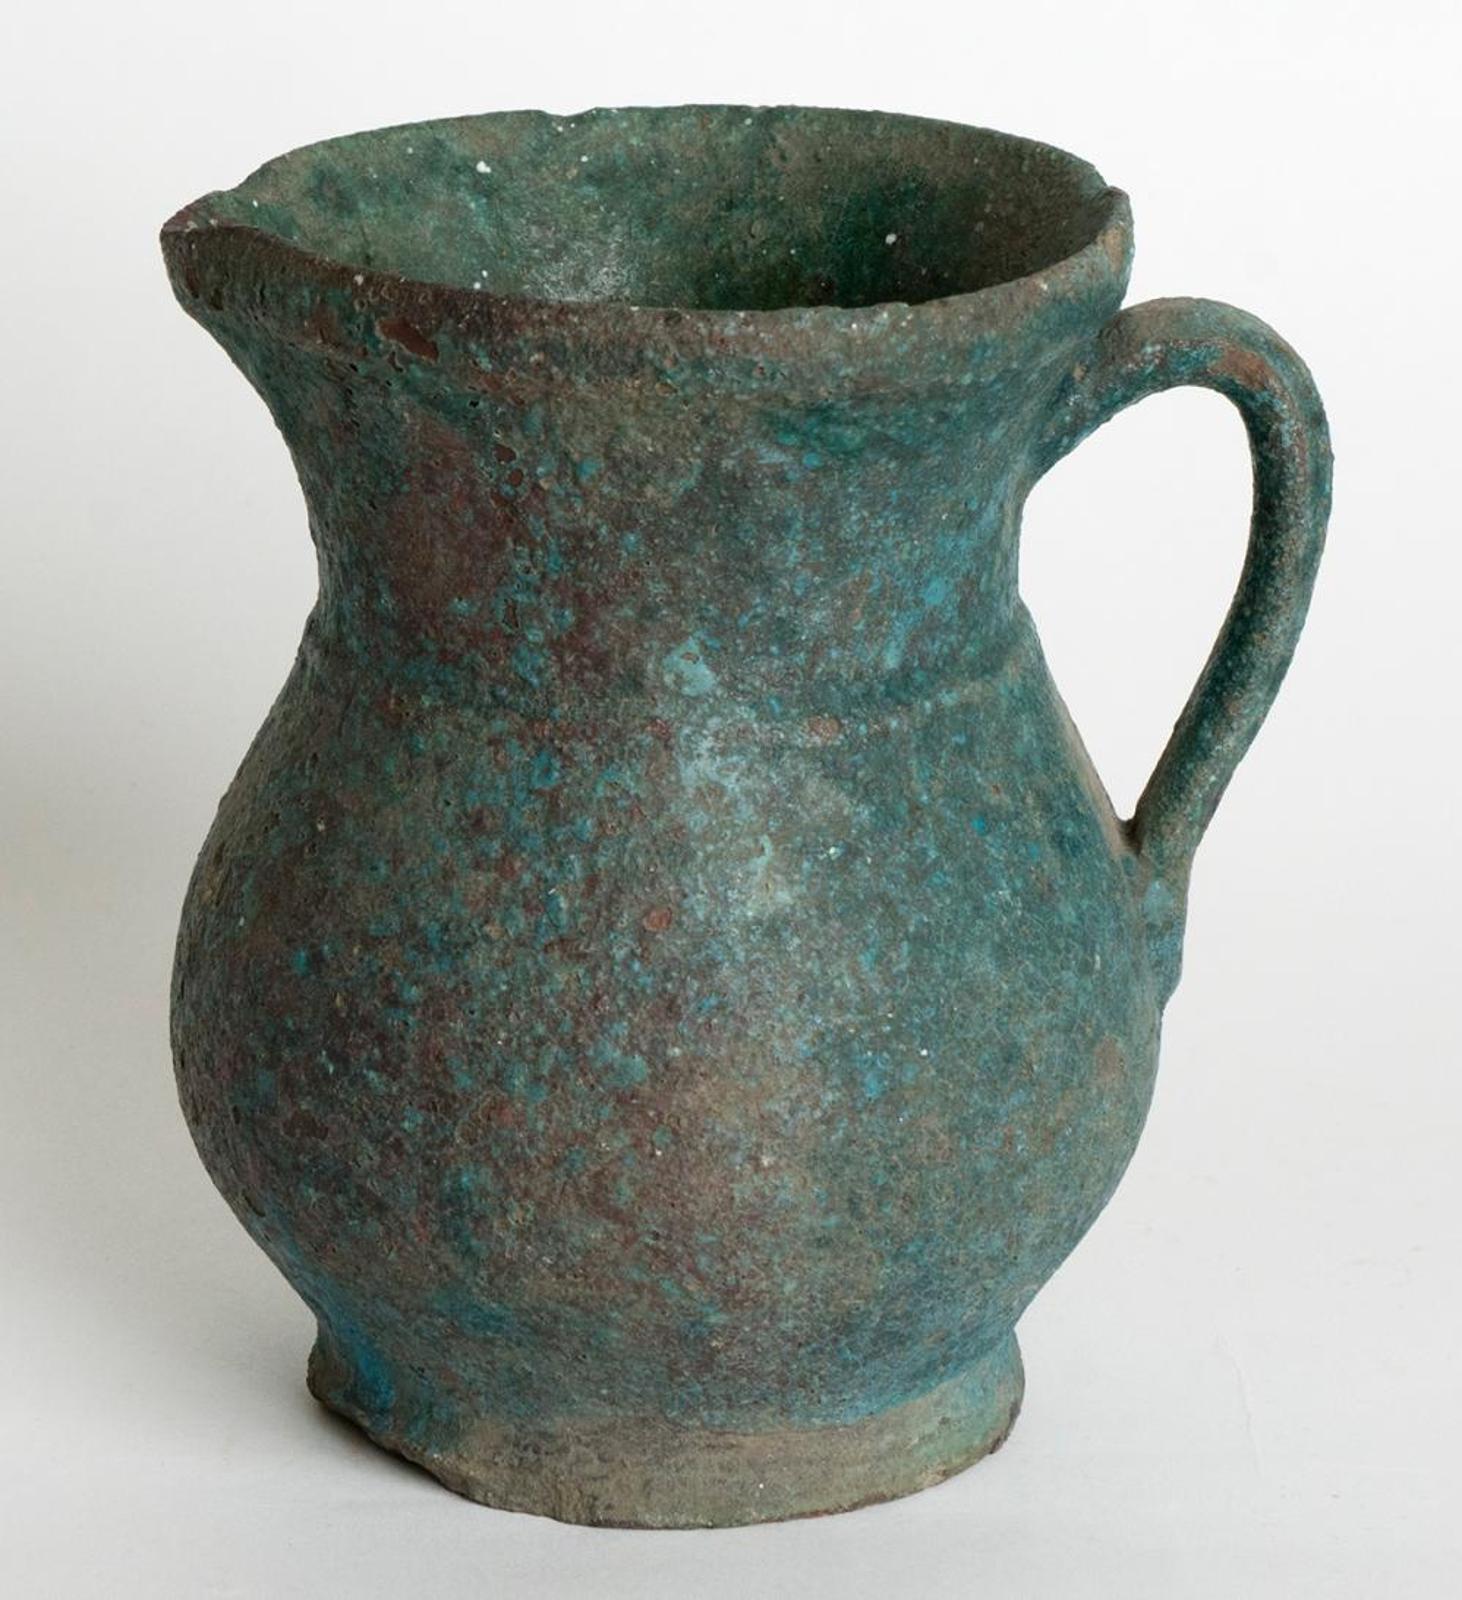 Peter Rupchan (1883-1944) - Small Pitcher With Blue/Green Glaze